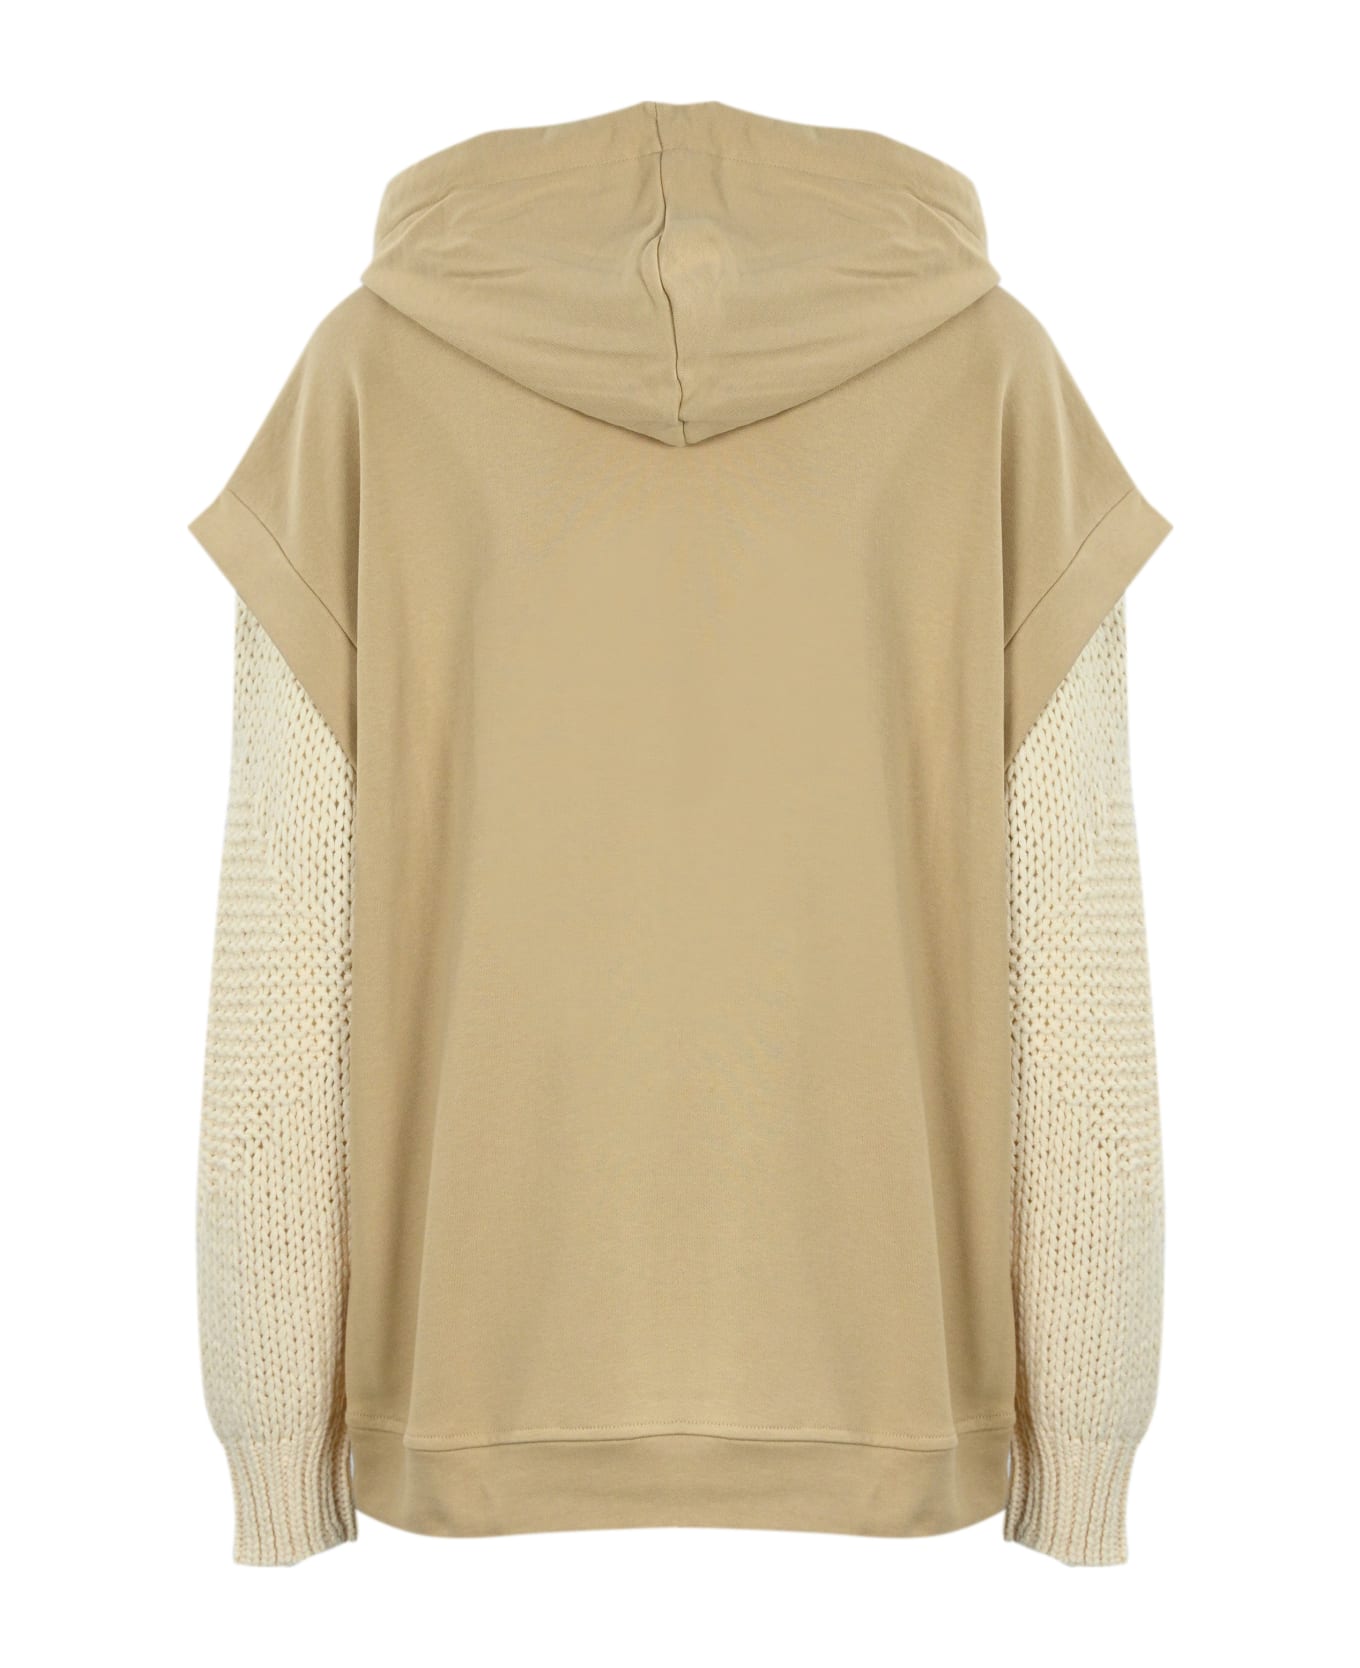 TwinSet Sweatshirt With Knitted Sleeves TwinSet - ALMOND